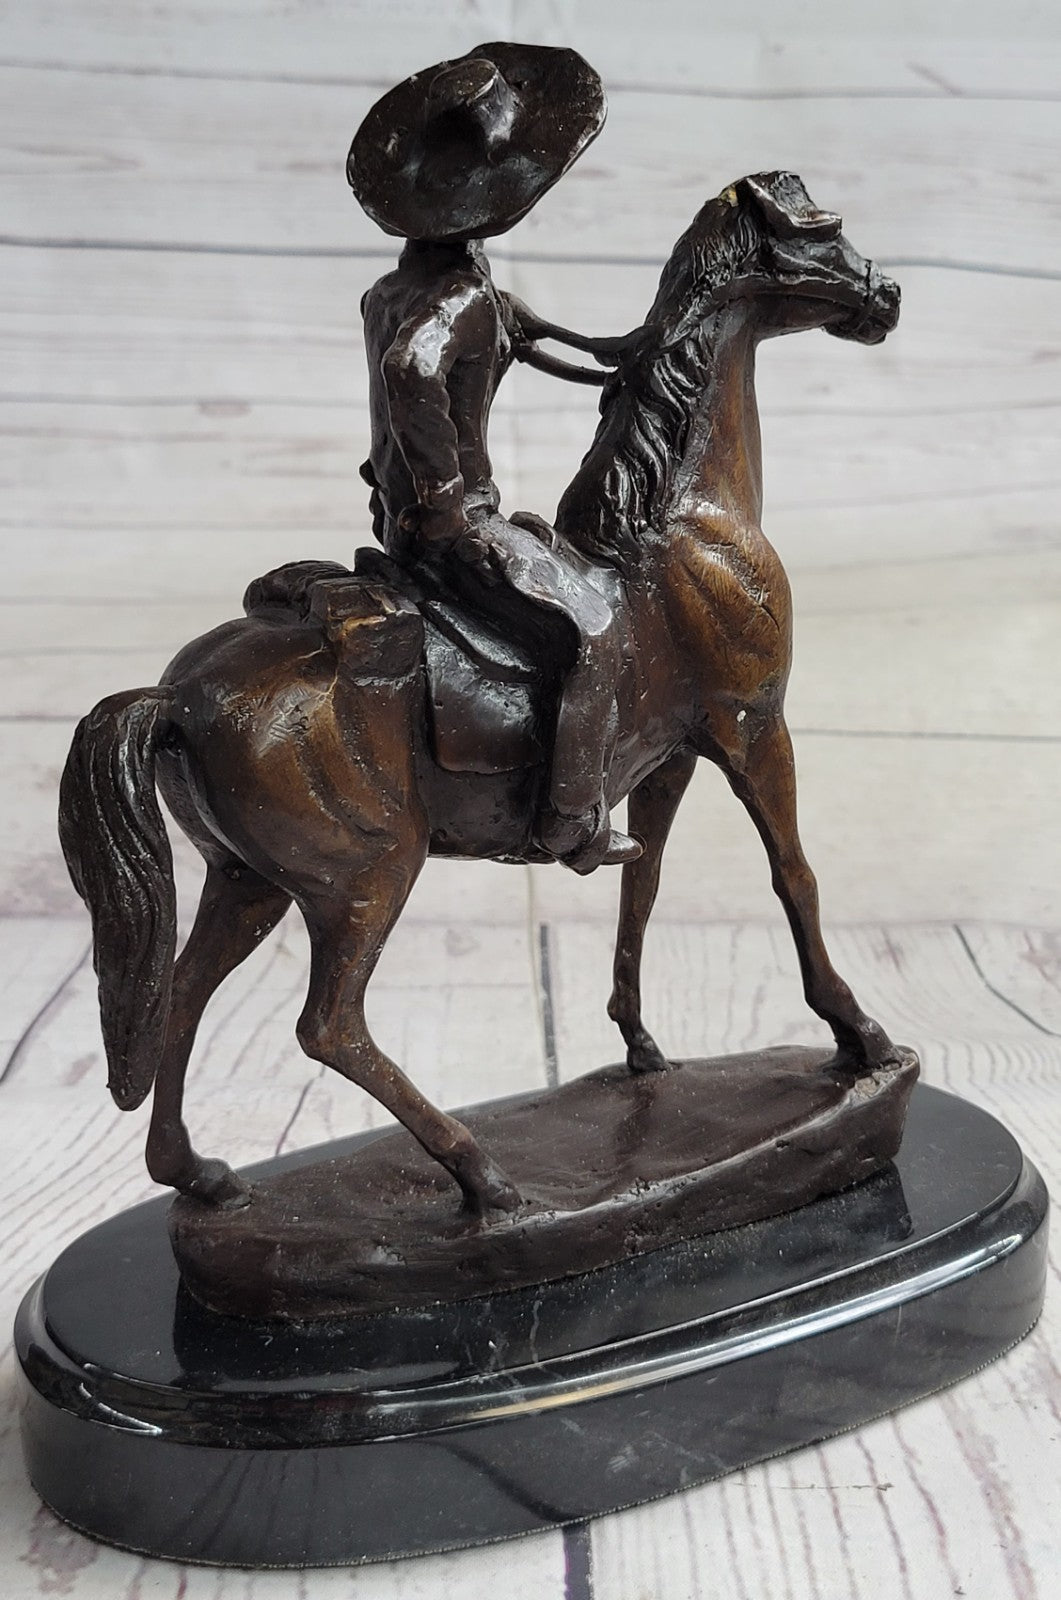 Handcrafted bronze sculpture SALE Marbl W/ Art Russell Charles By " Rogers Will